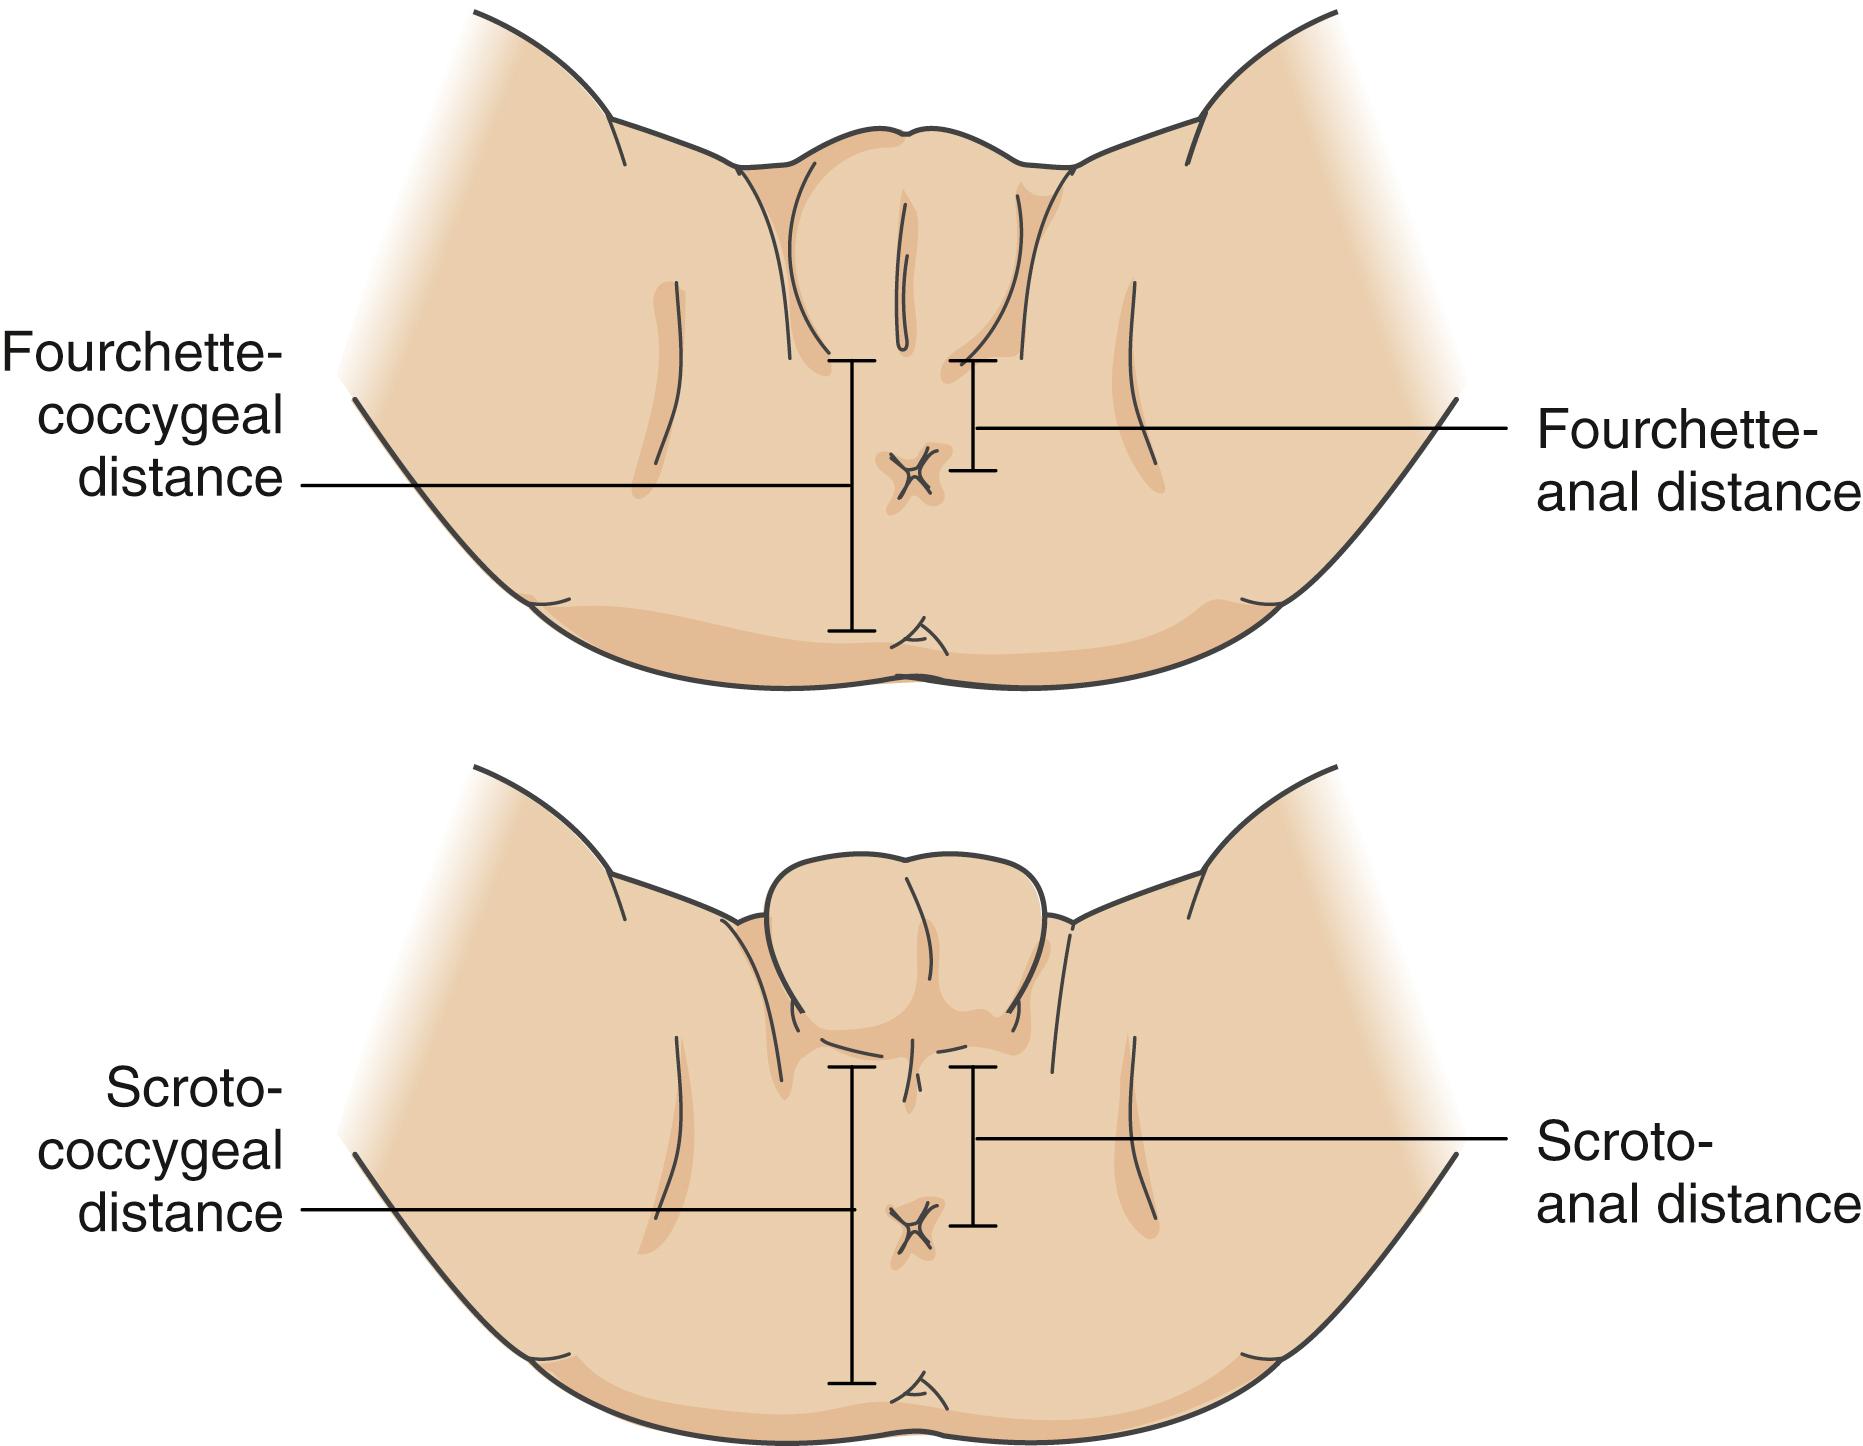 Fig. 19.3, Measuring the anal position index (API) in females and males. The API is defined as the ratio of the distance between the anus and the posterior aspect of the genitals (the fourchette in females and scrotum in males) to the distance between the coccyx and the posterior genitals.